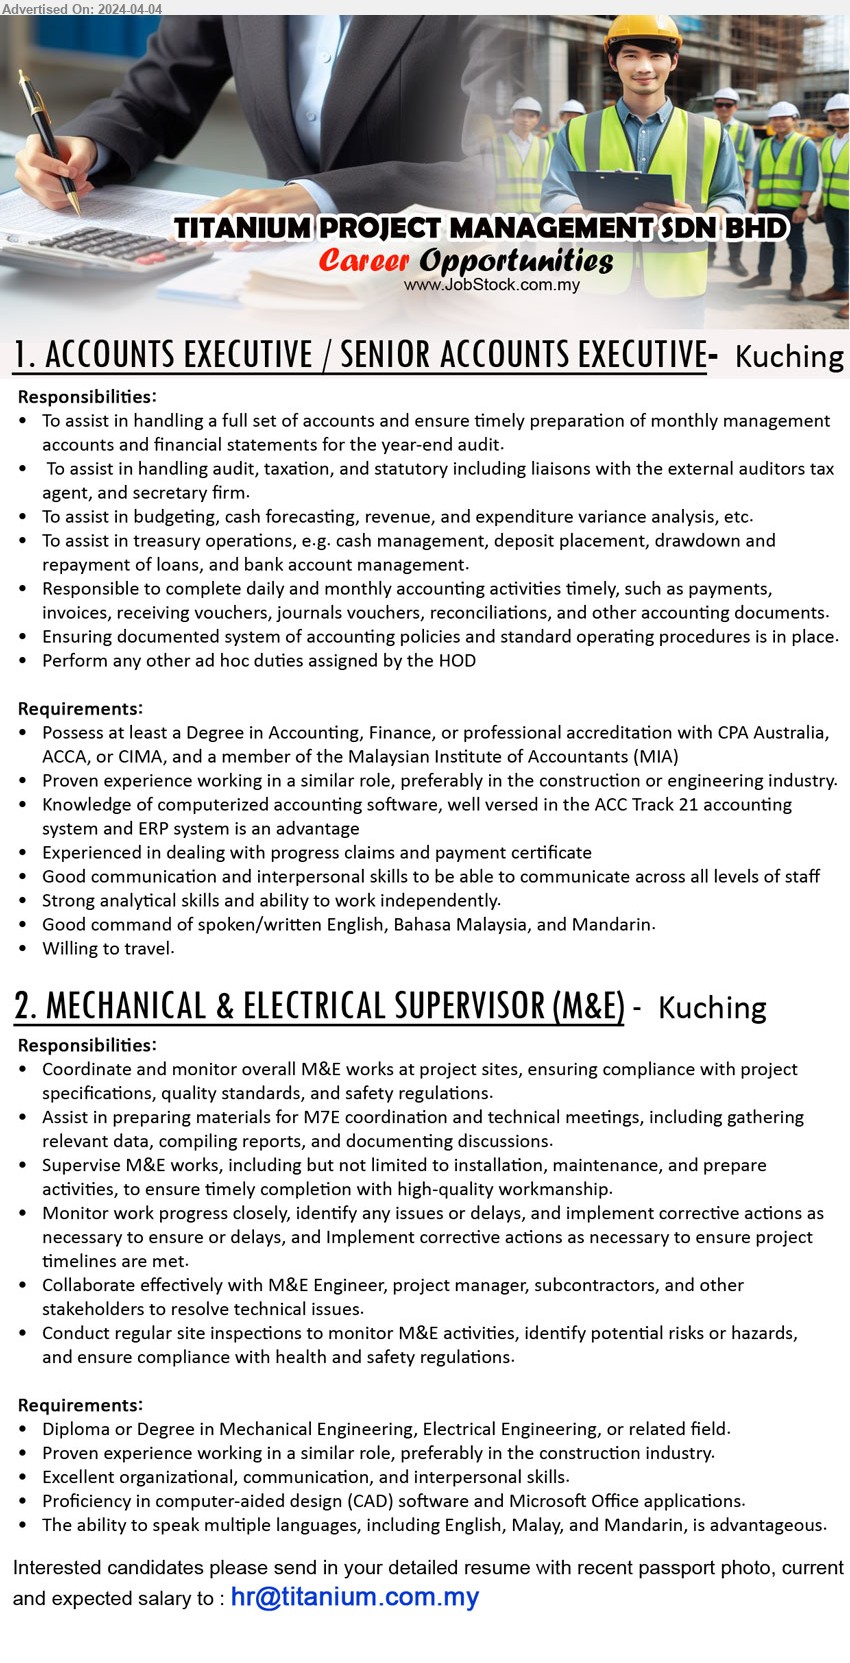 TITANIUM PROJECT MANAGEMENT SDN BHD - 1. ACCOUNTS EXECUTIVE / SENIOR ACCOUNTS EXECUTIVE (Kuching), Degree in Accounting, Finance, or professional accreditation with CPA Australia, ACCA, or CIMA, and a member of the Malaysian Institute of Accountants (MIA),...
2. MECHANICAL & ELECTRICAL SUPERVISOR (M&E) (Kuching), Diploma or Degree in Mechanical Engineering, Electrical Engineering,...
Email resume to ...